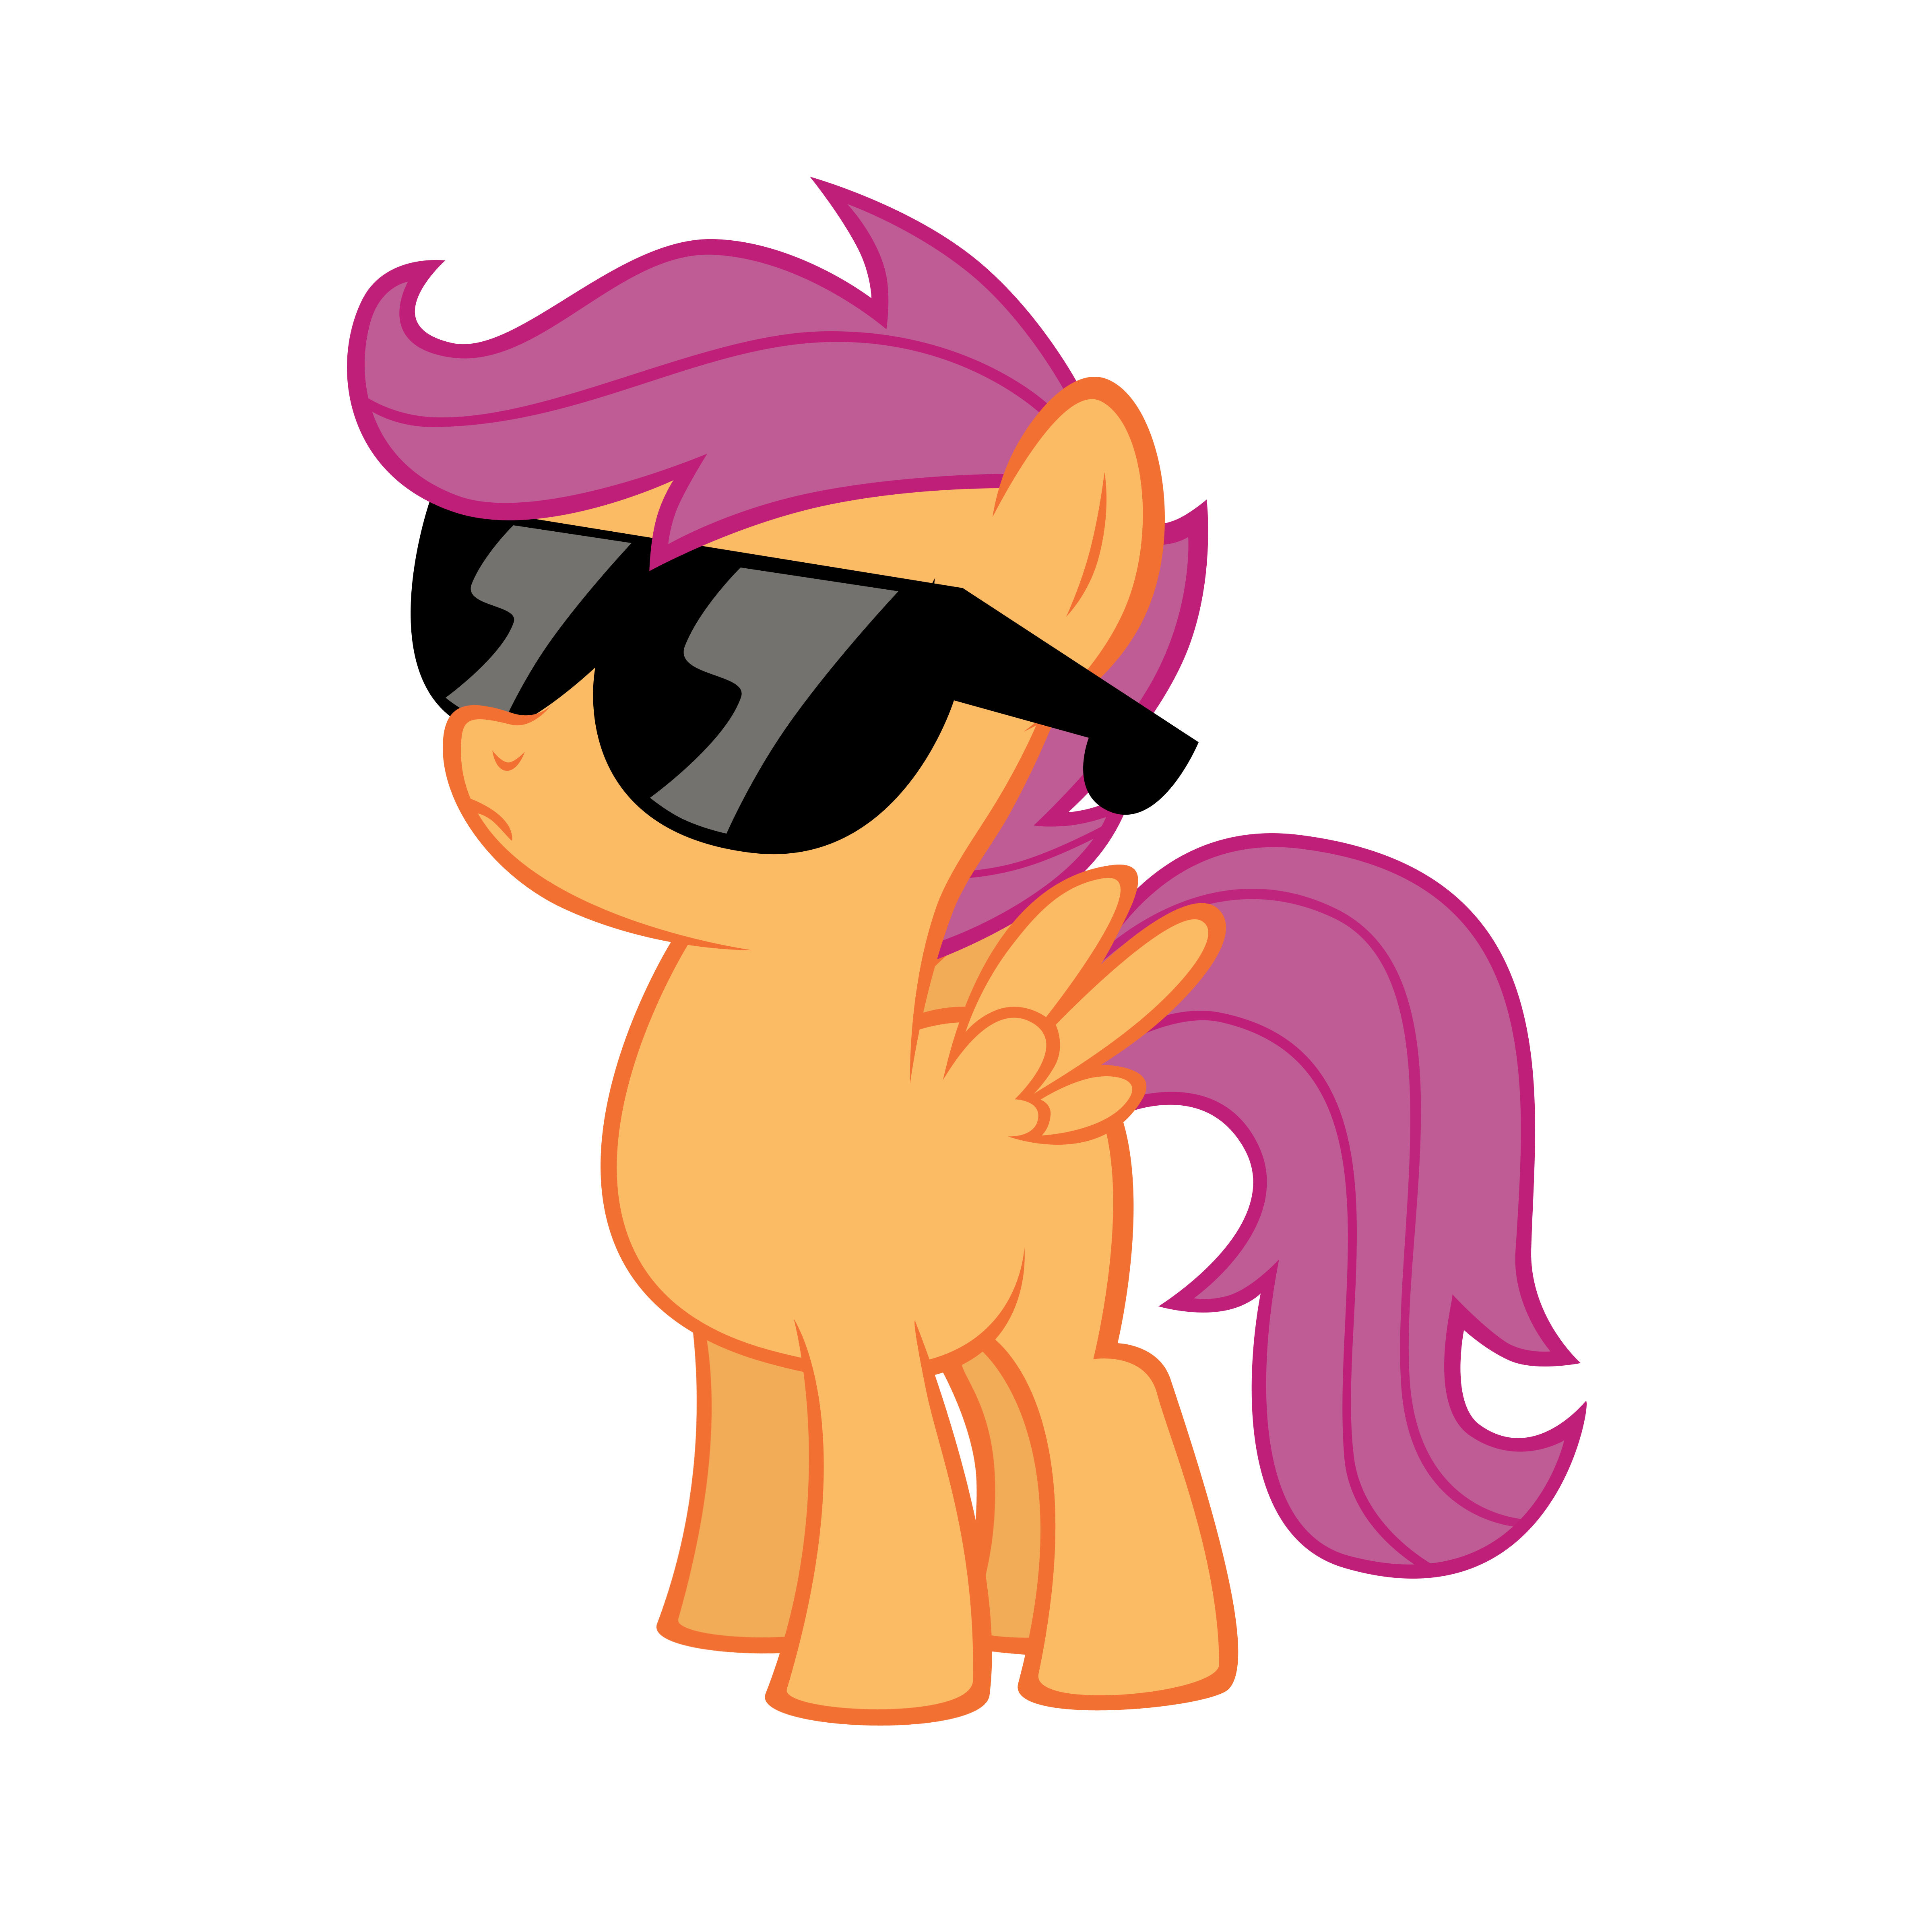 scootaloo___deal_with_it_by_austiniousi-